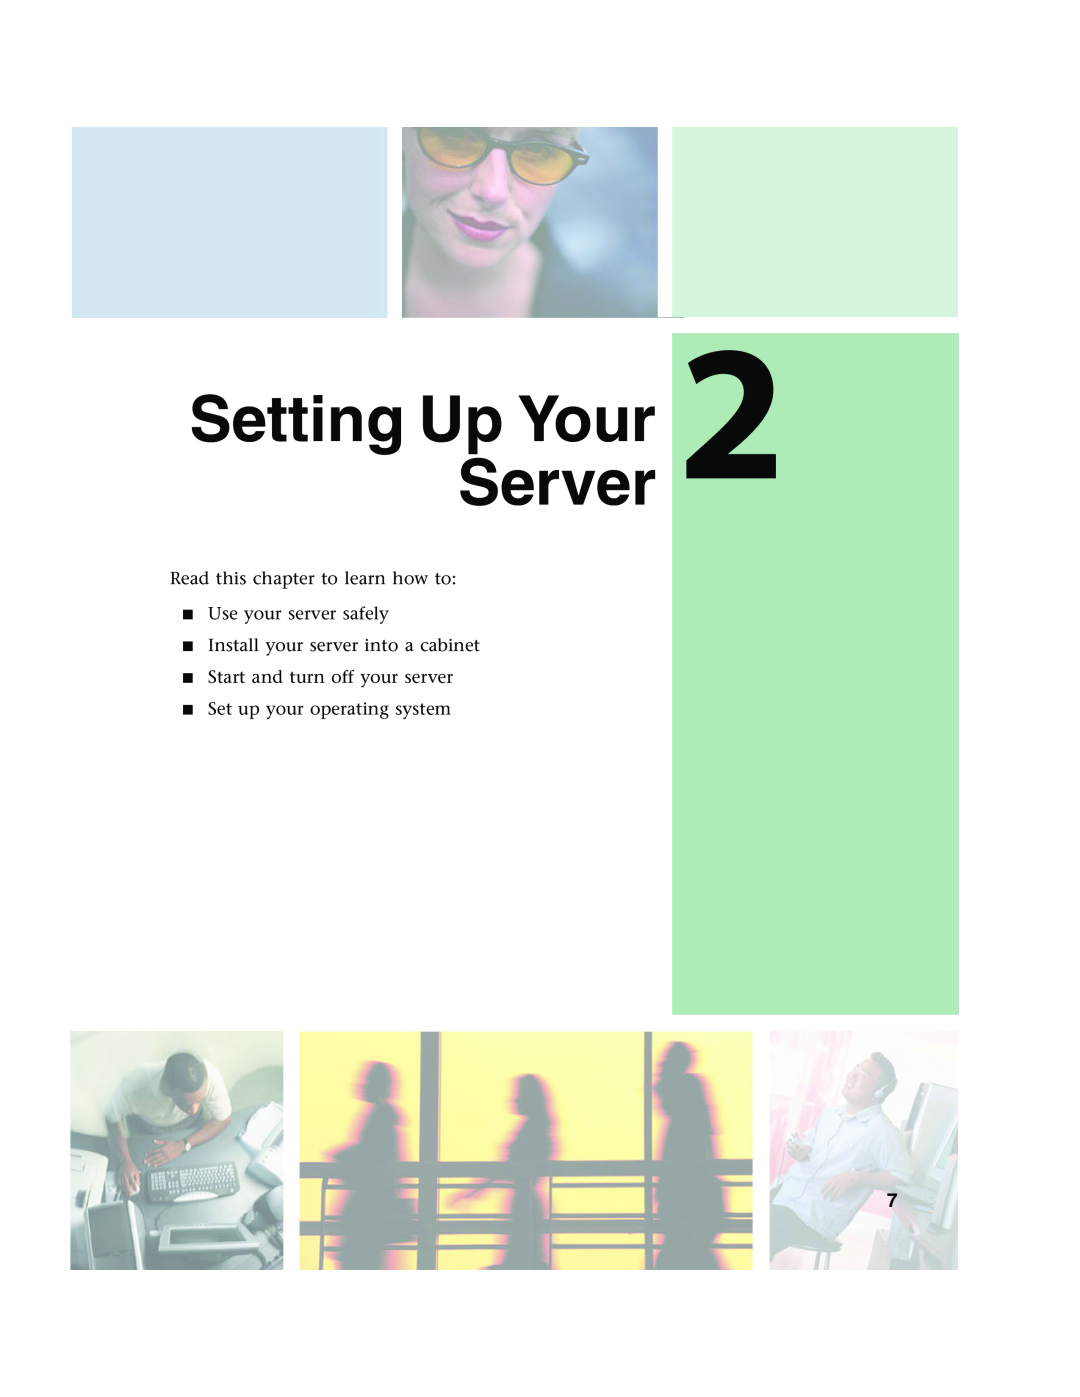 Gateway 955 Setting UpServerYour, Read this chapter to learn how to Use your server safely, Set up your operating system 